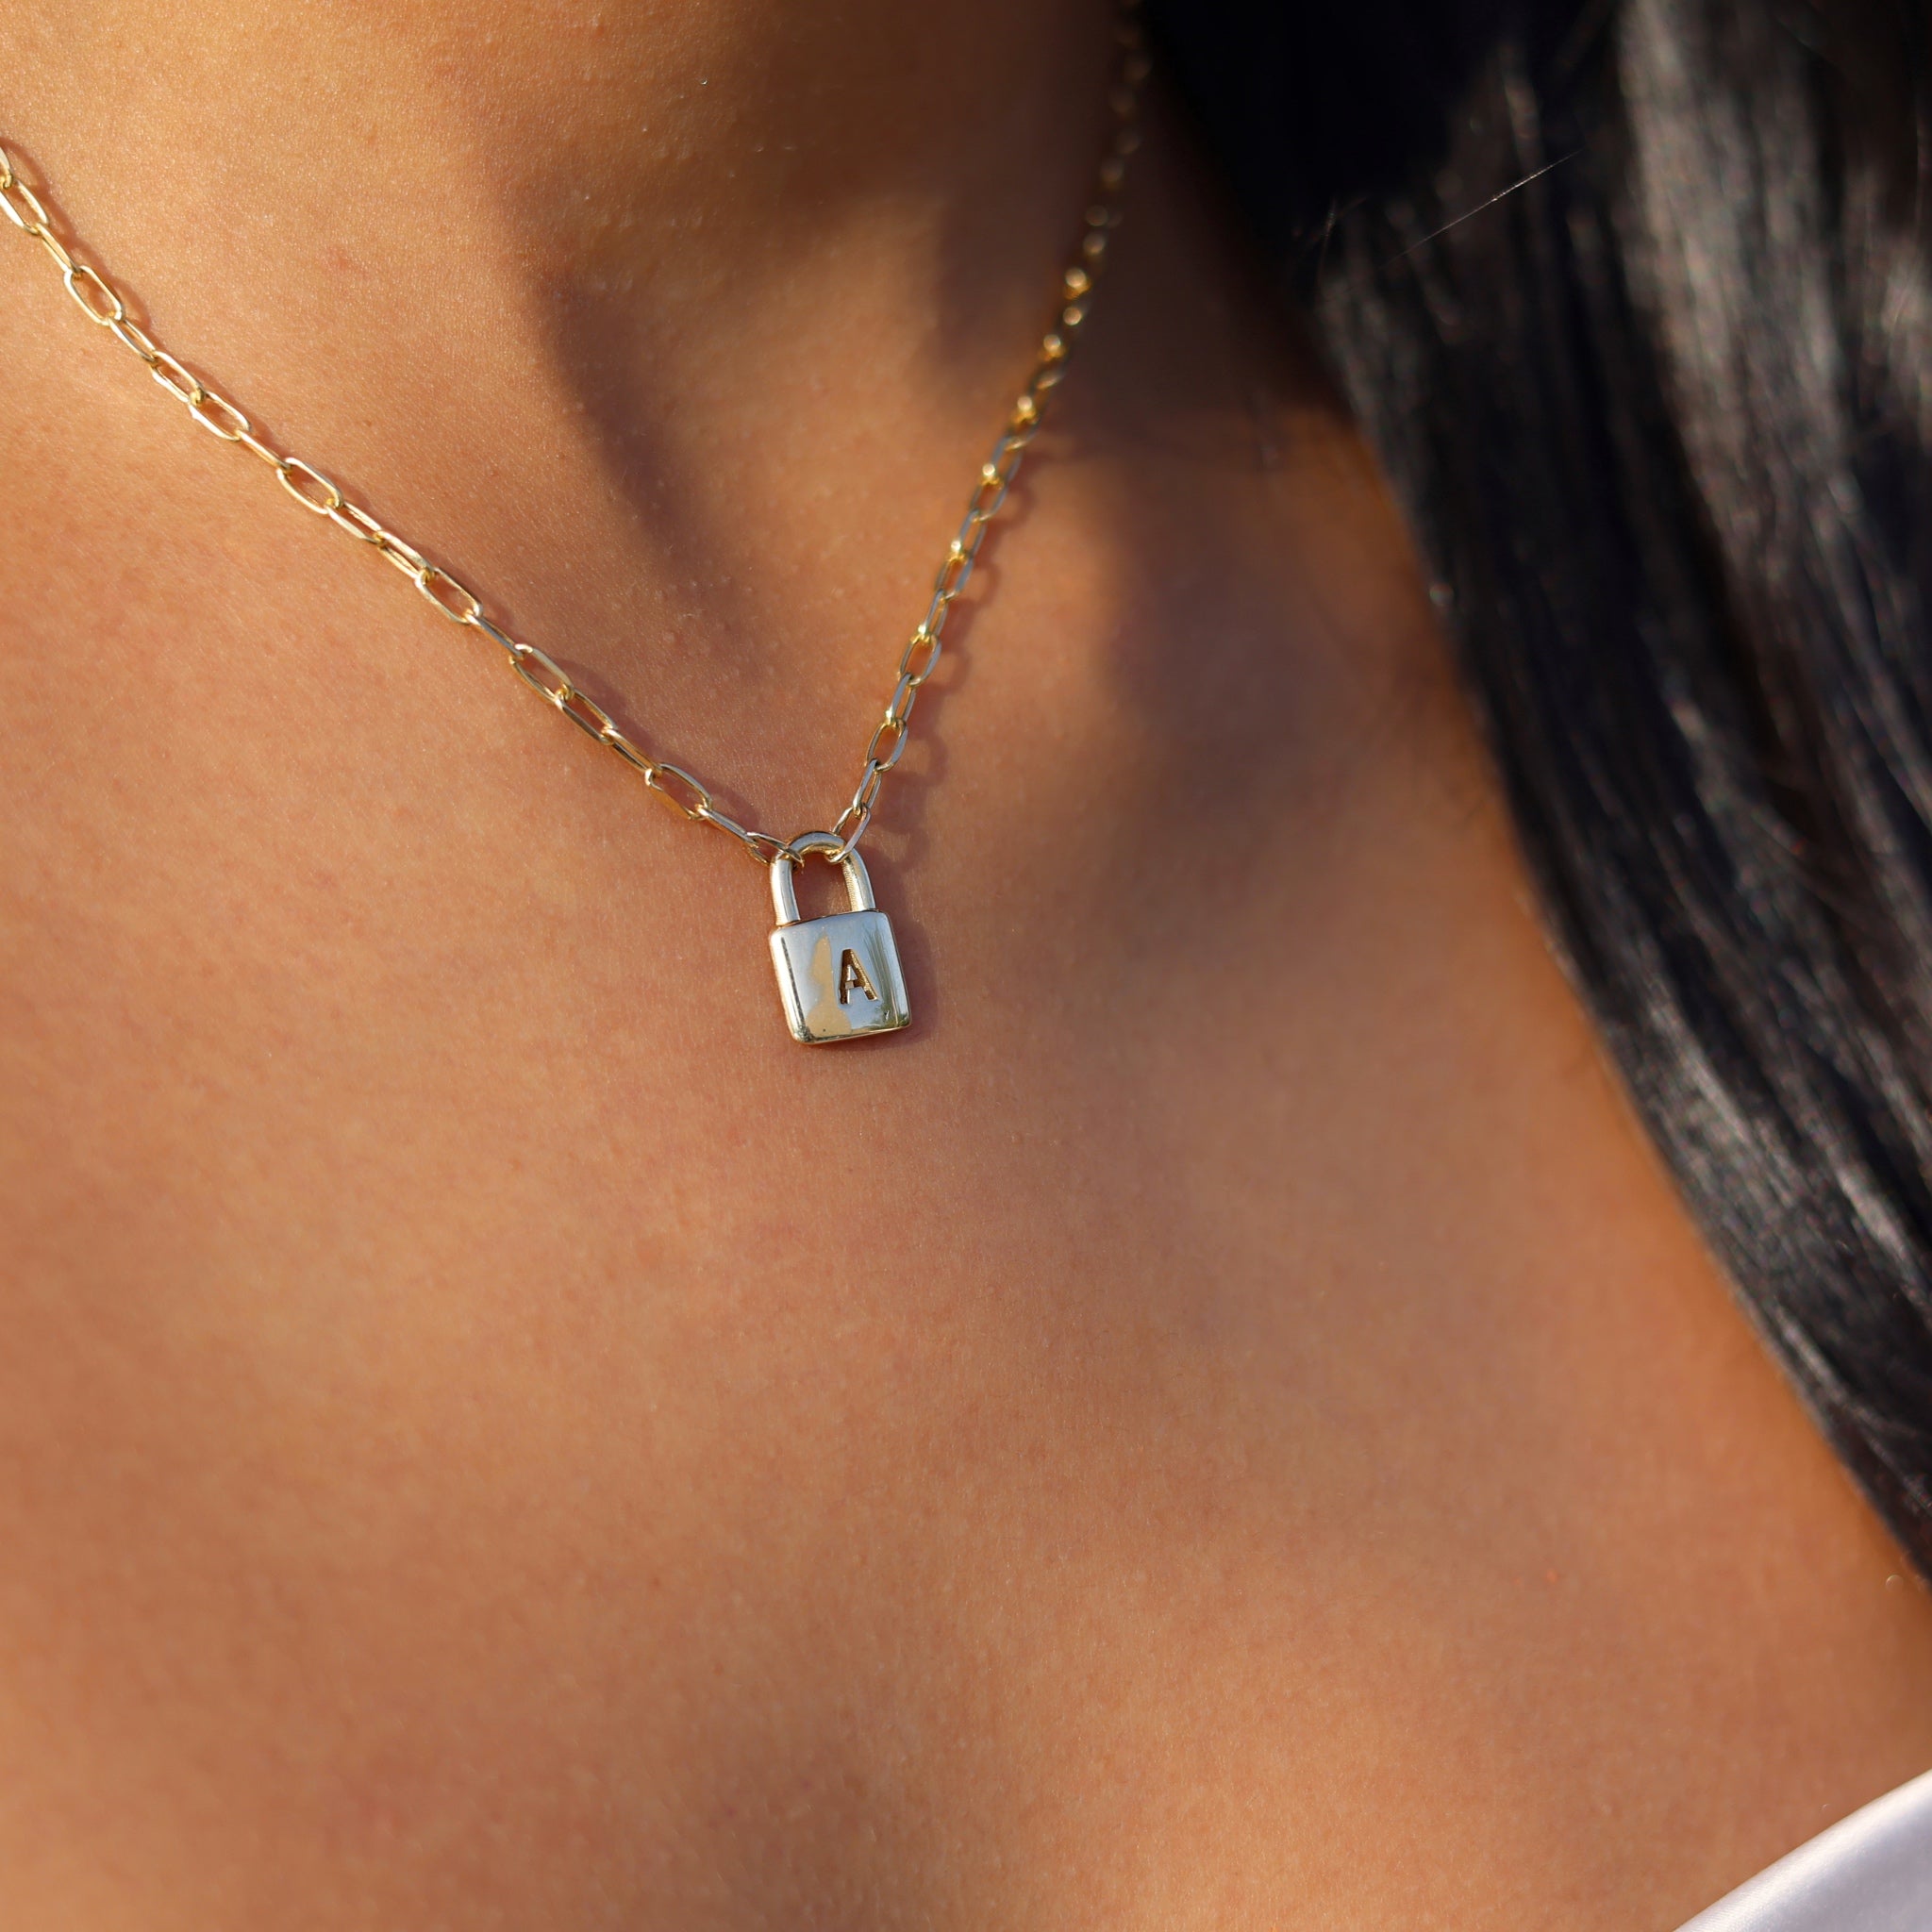 Initial Lock Necklace